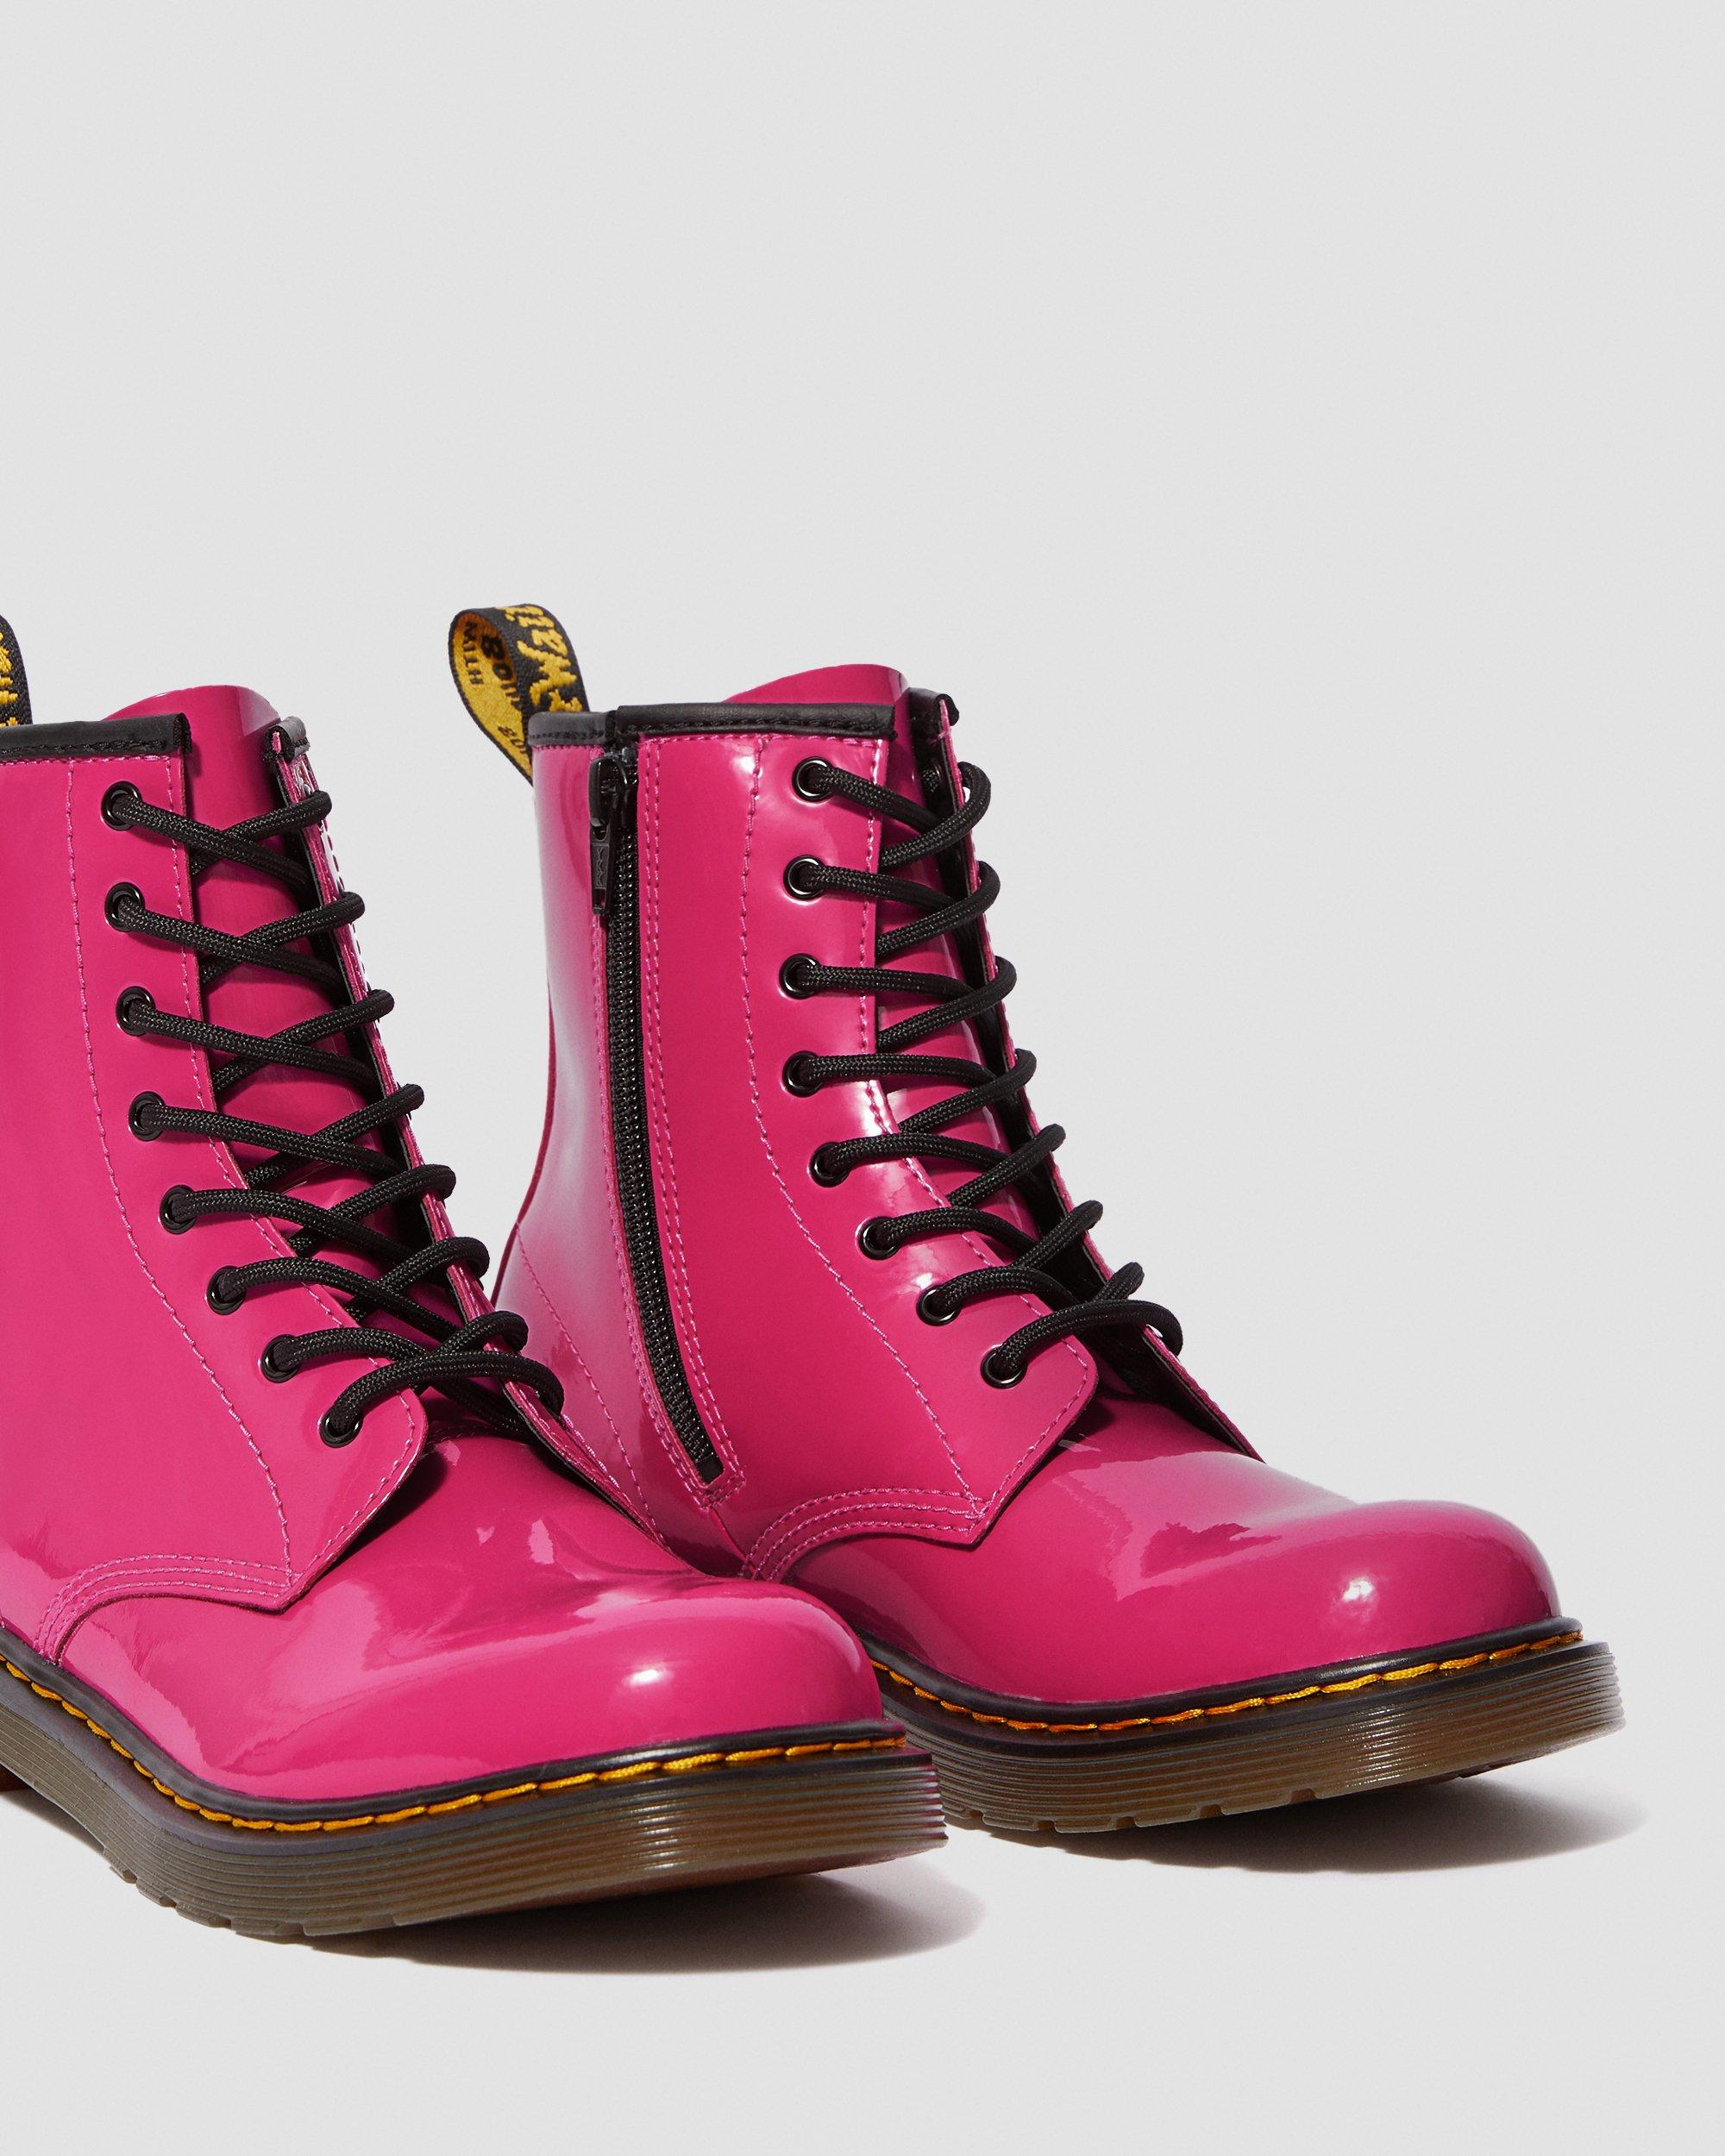 JUGEND 1460 PATENT in Hot Pink